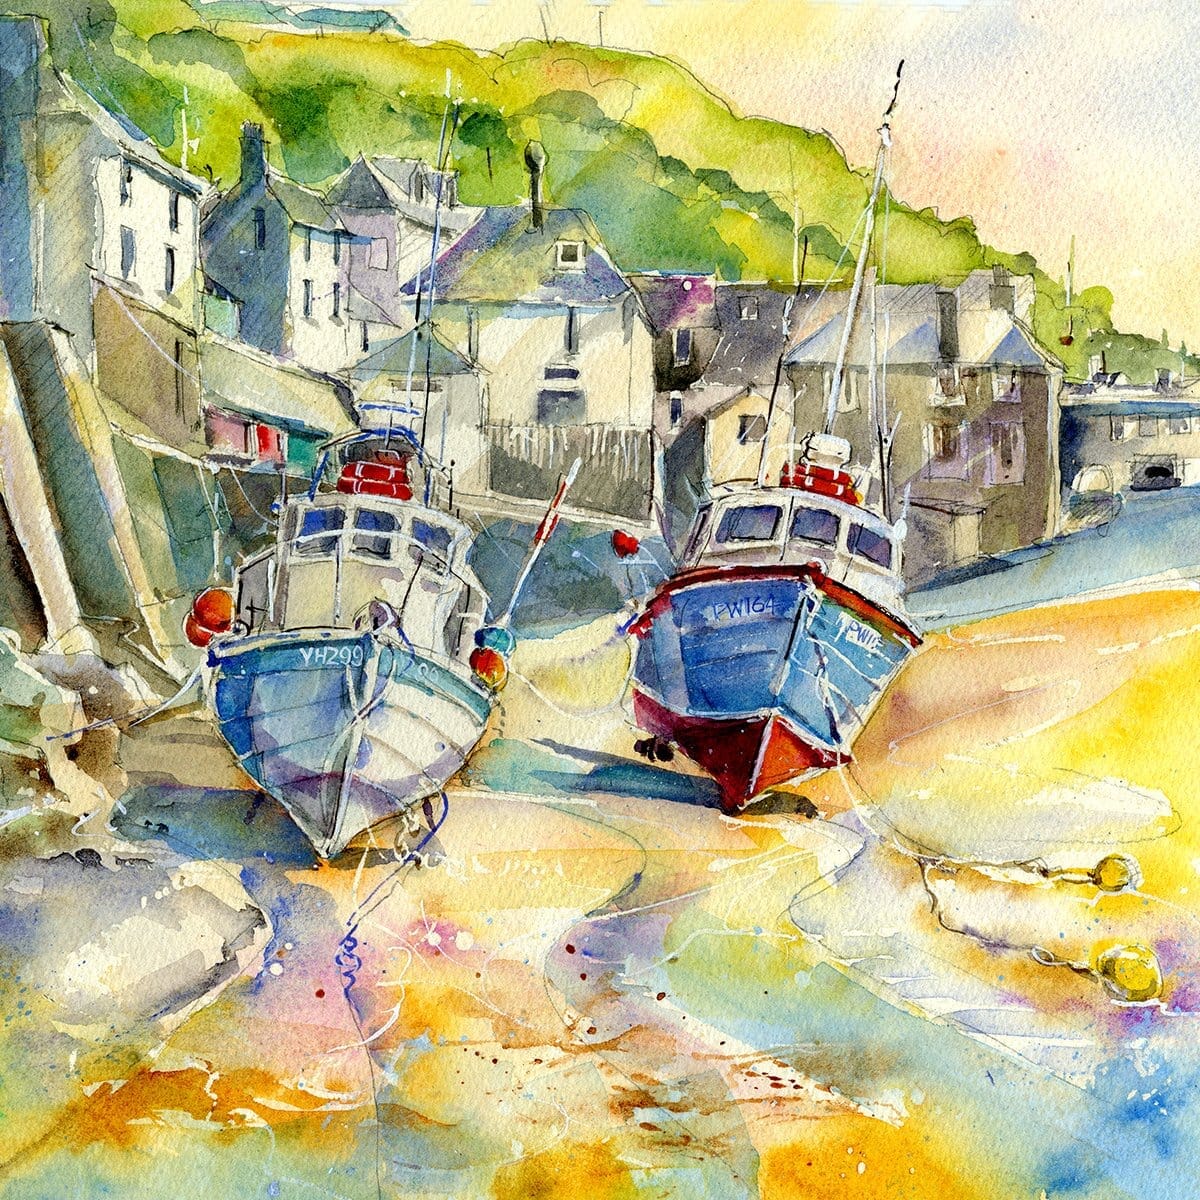 Port Isaac Fishing Boats Greeting Card designed by artist Sheila Gill
